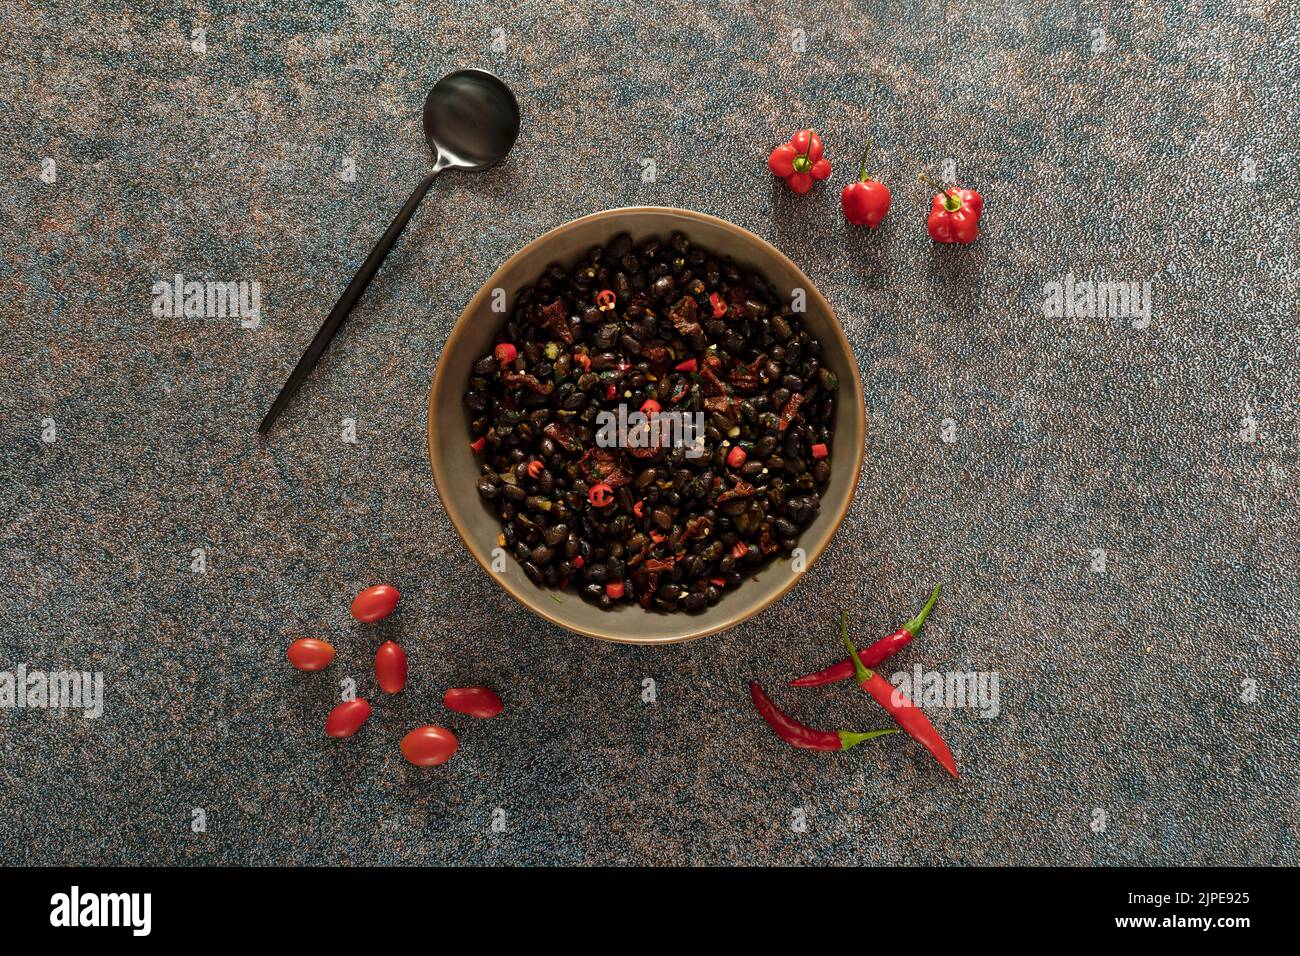 Black beans with dried tomatoes and red Cayenne chili peppers in a brown dish. Stock Photo